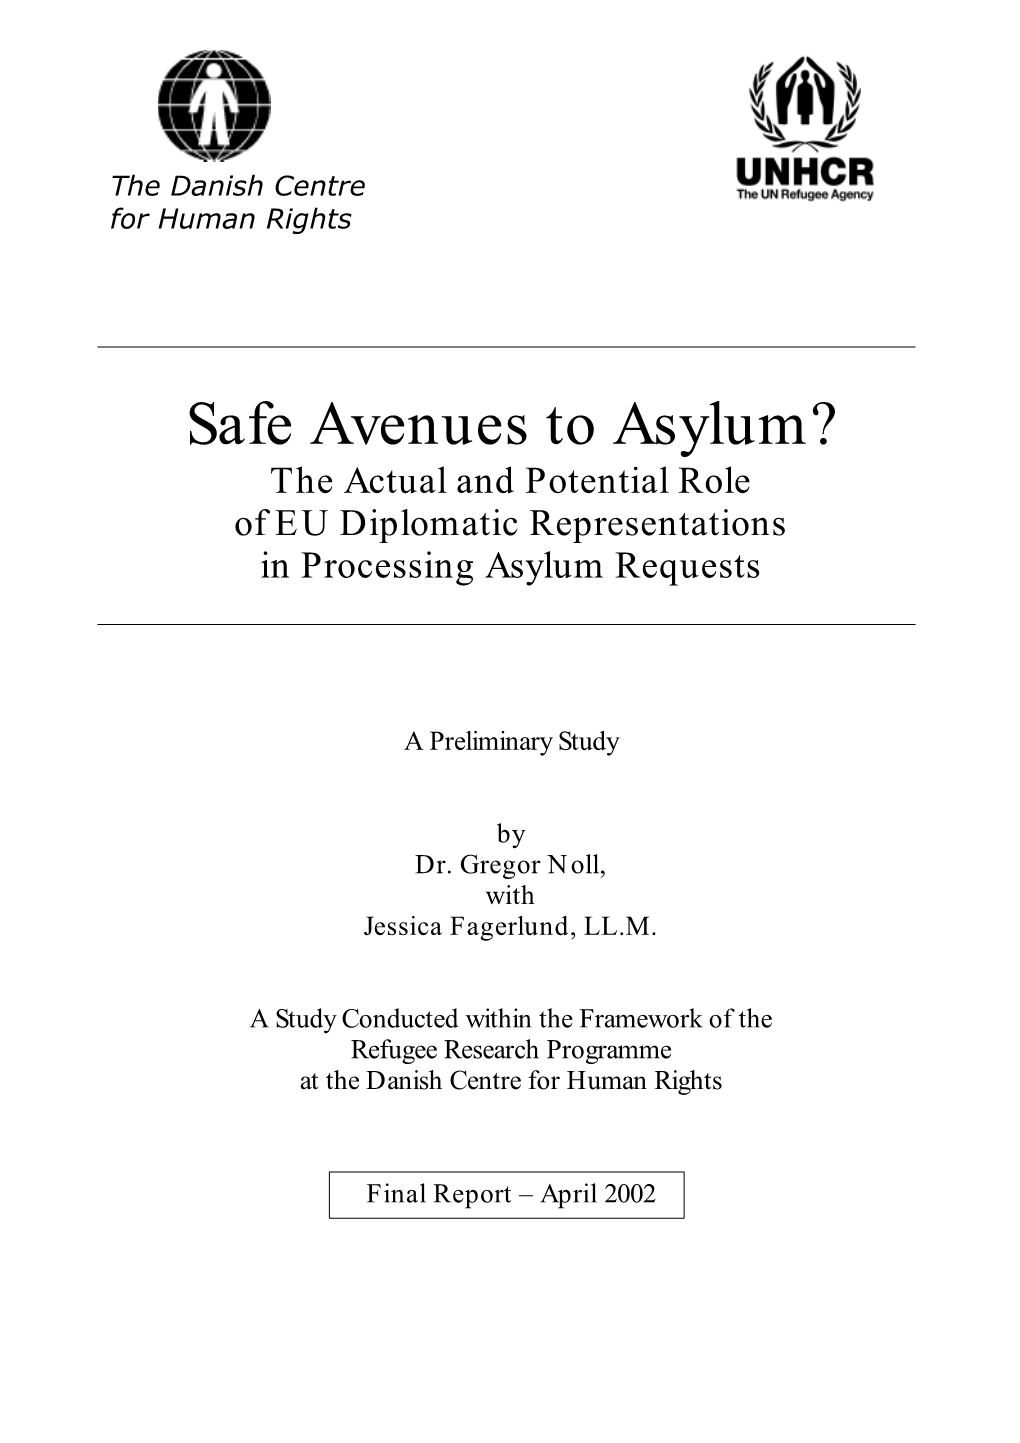 Safe Avenues to Asylum? the Actual and Potential Role of EU Diplomatic Representations in Processing Asylum Requests